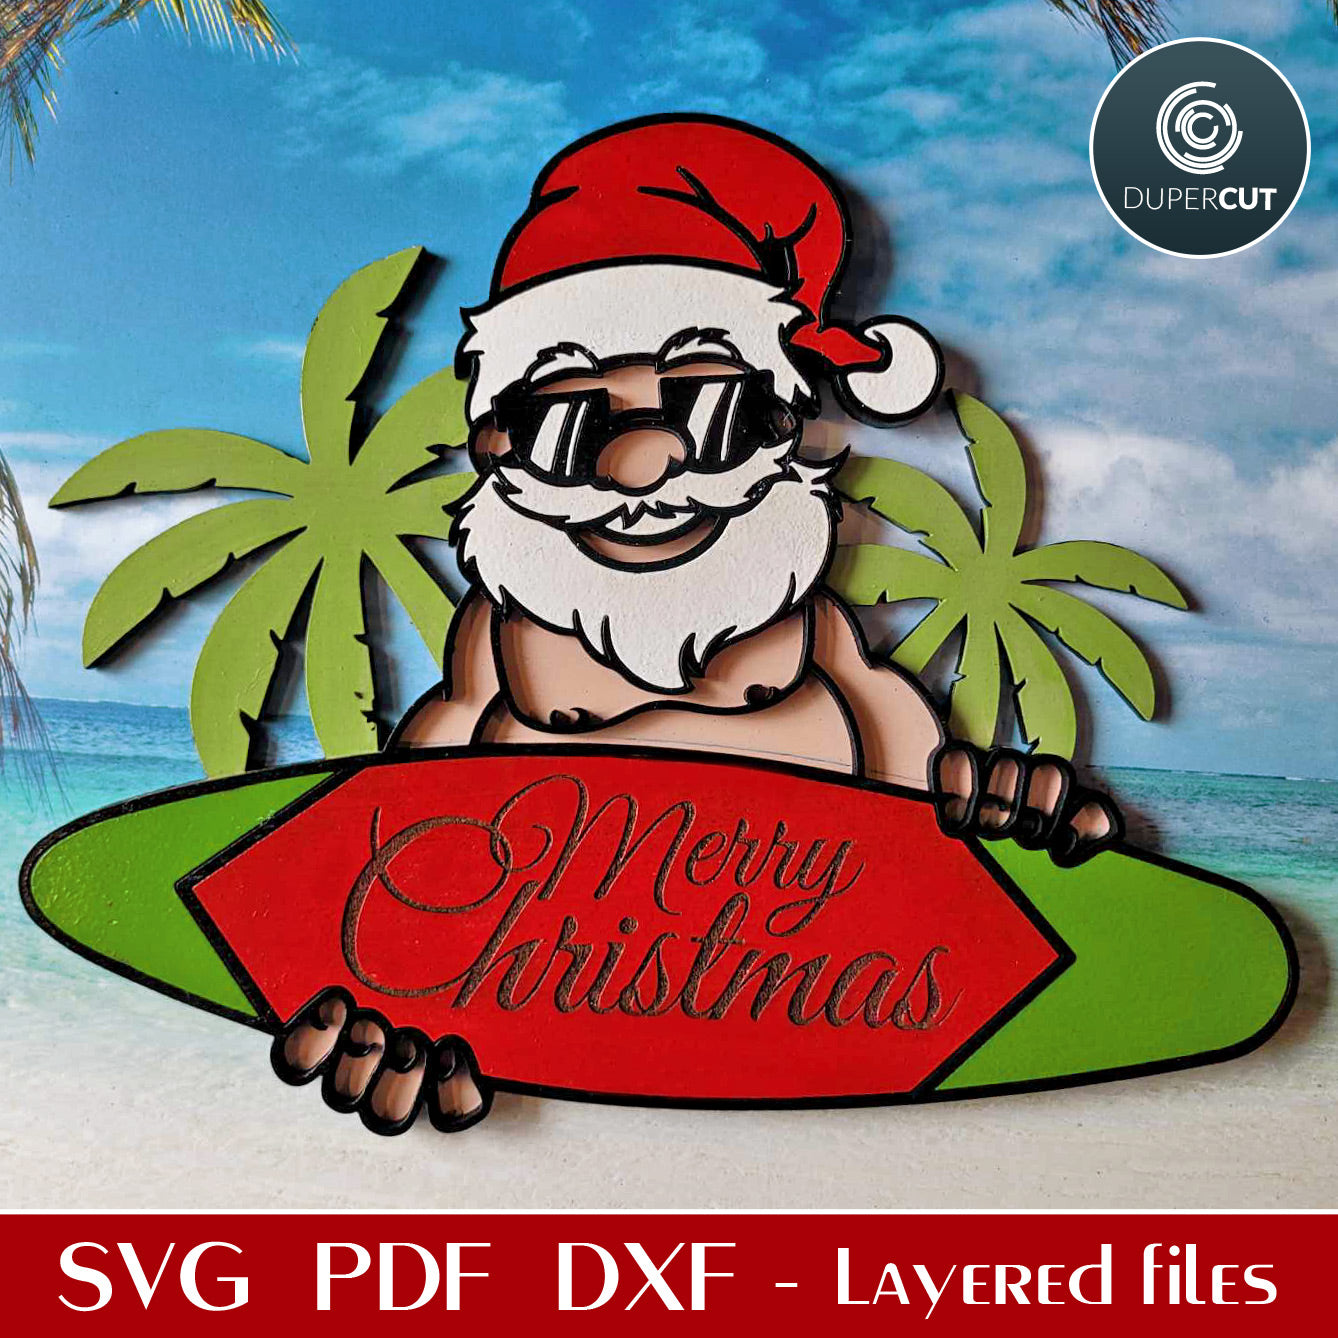 Santa Clause on a beach with surfing board sign  - SVG DXF layered cutting files for laser Glowforge, X-tool, Cricut, CNC plasma machines, scroll saw pattern by www.DuperCut.com